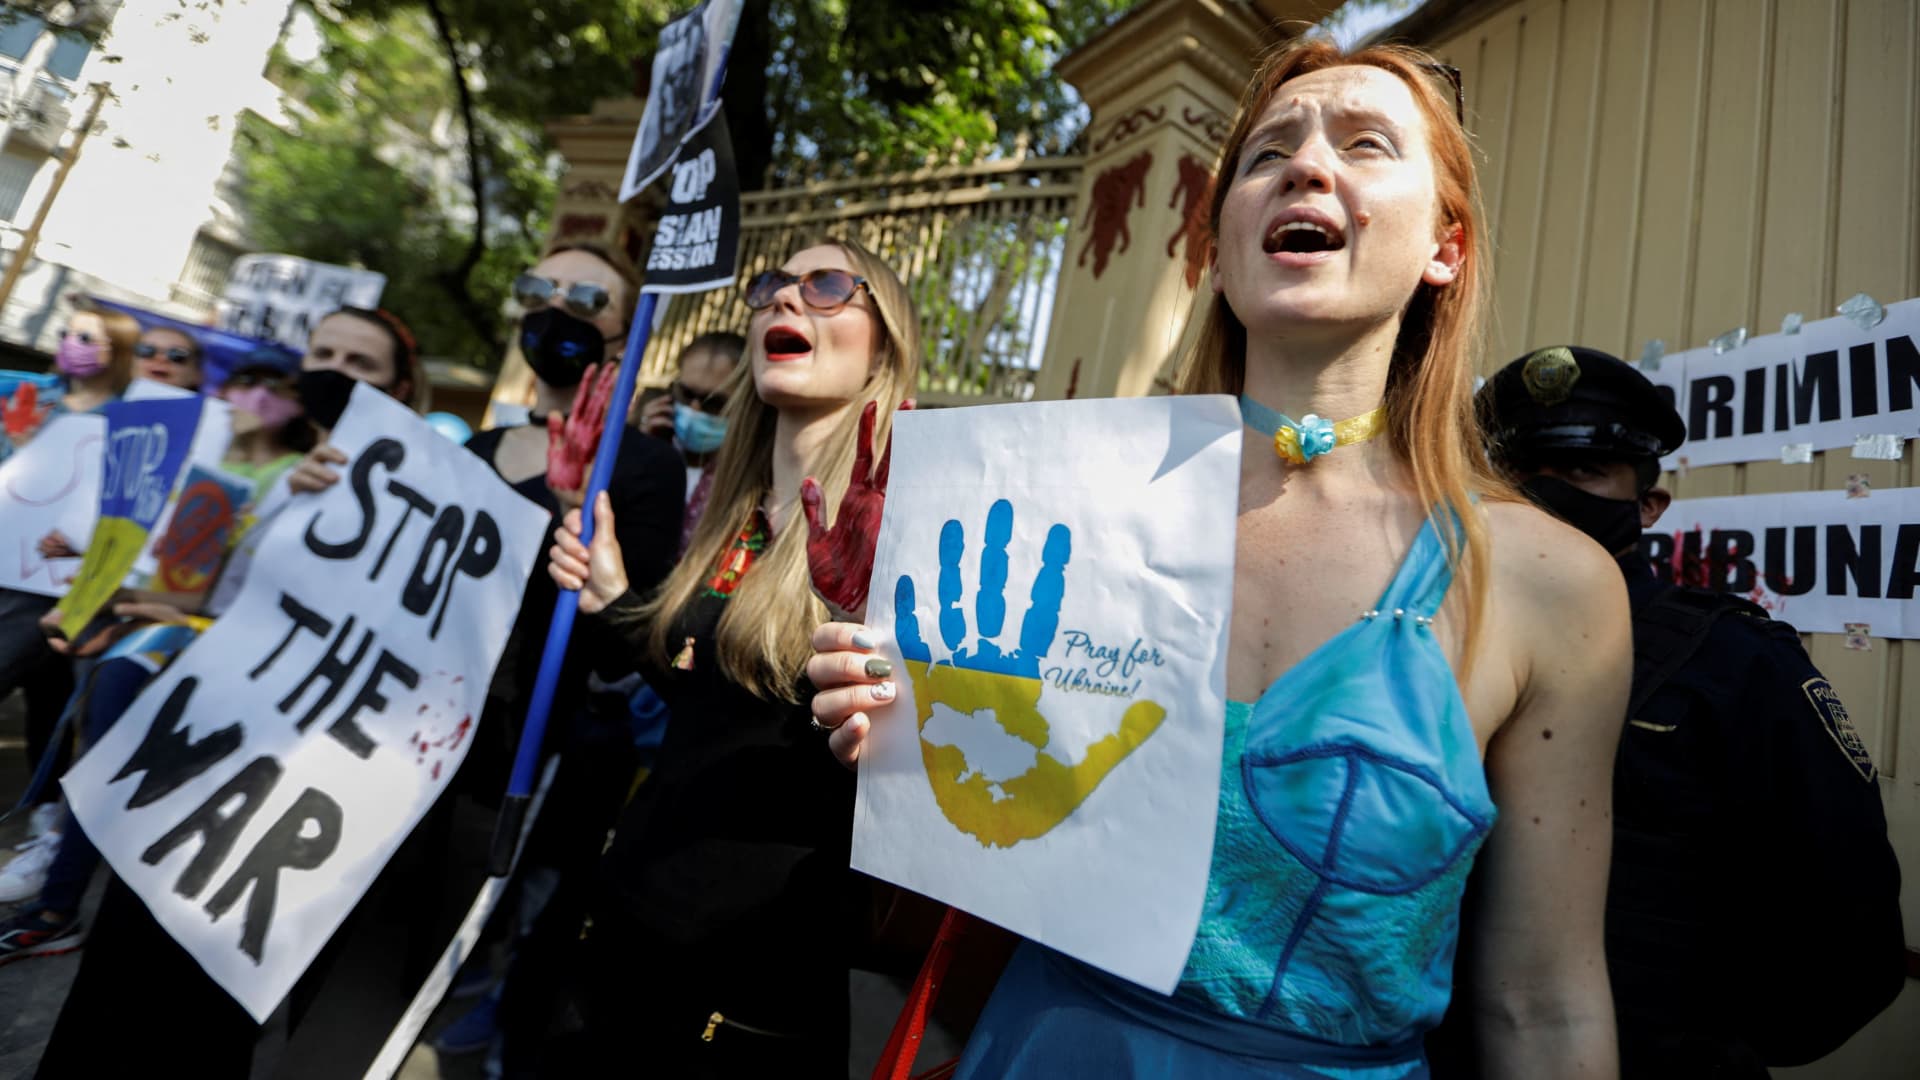 People hold signs in a protest after Russia launched a massive military operation against Ukraine, outside at Russia embassy in Mexico City, Mexico February 24, 2022.